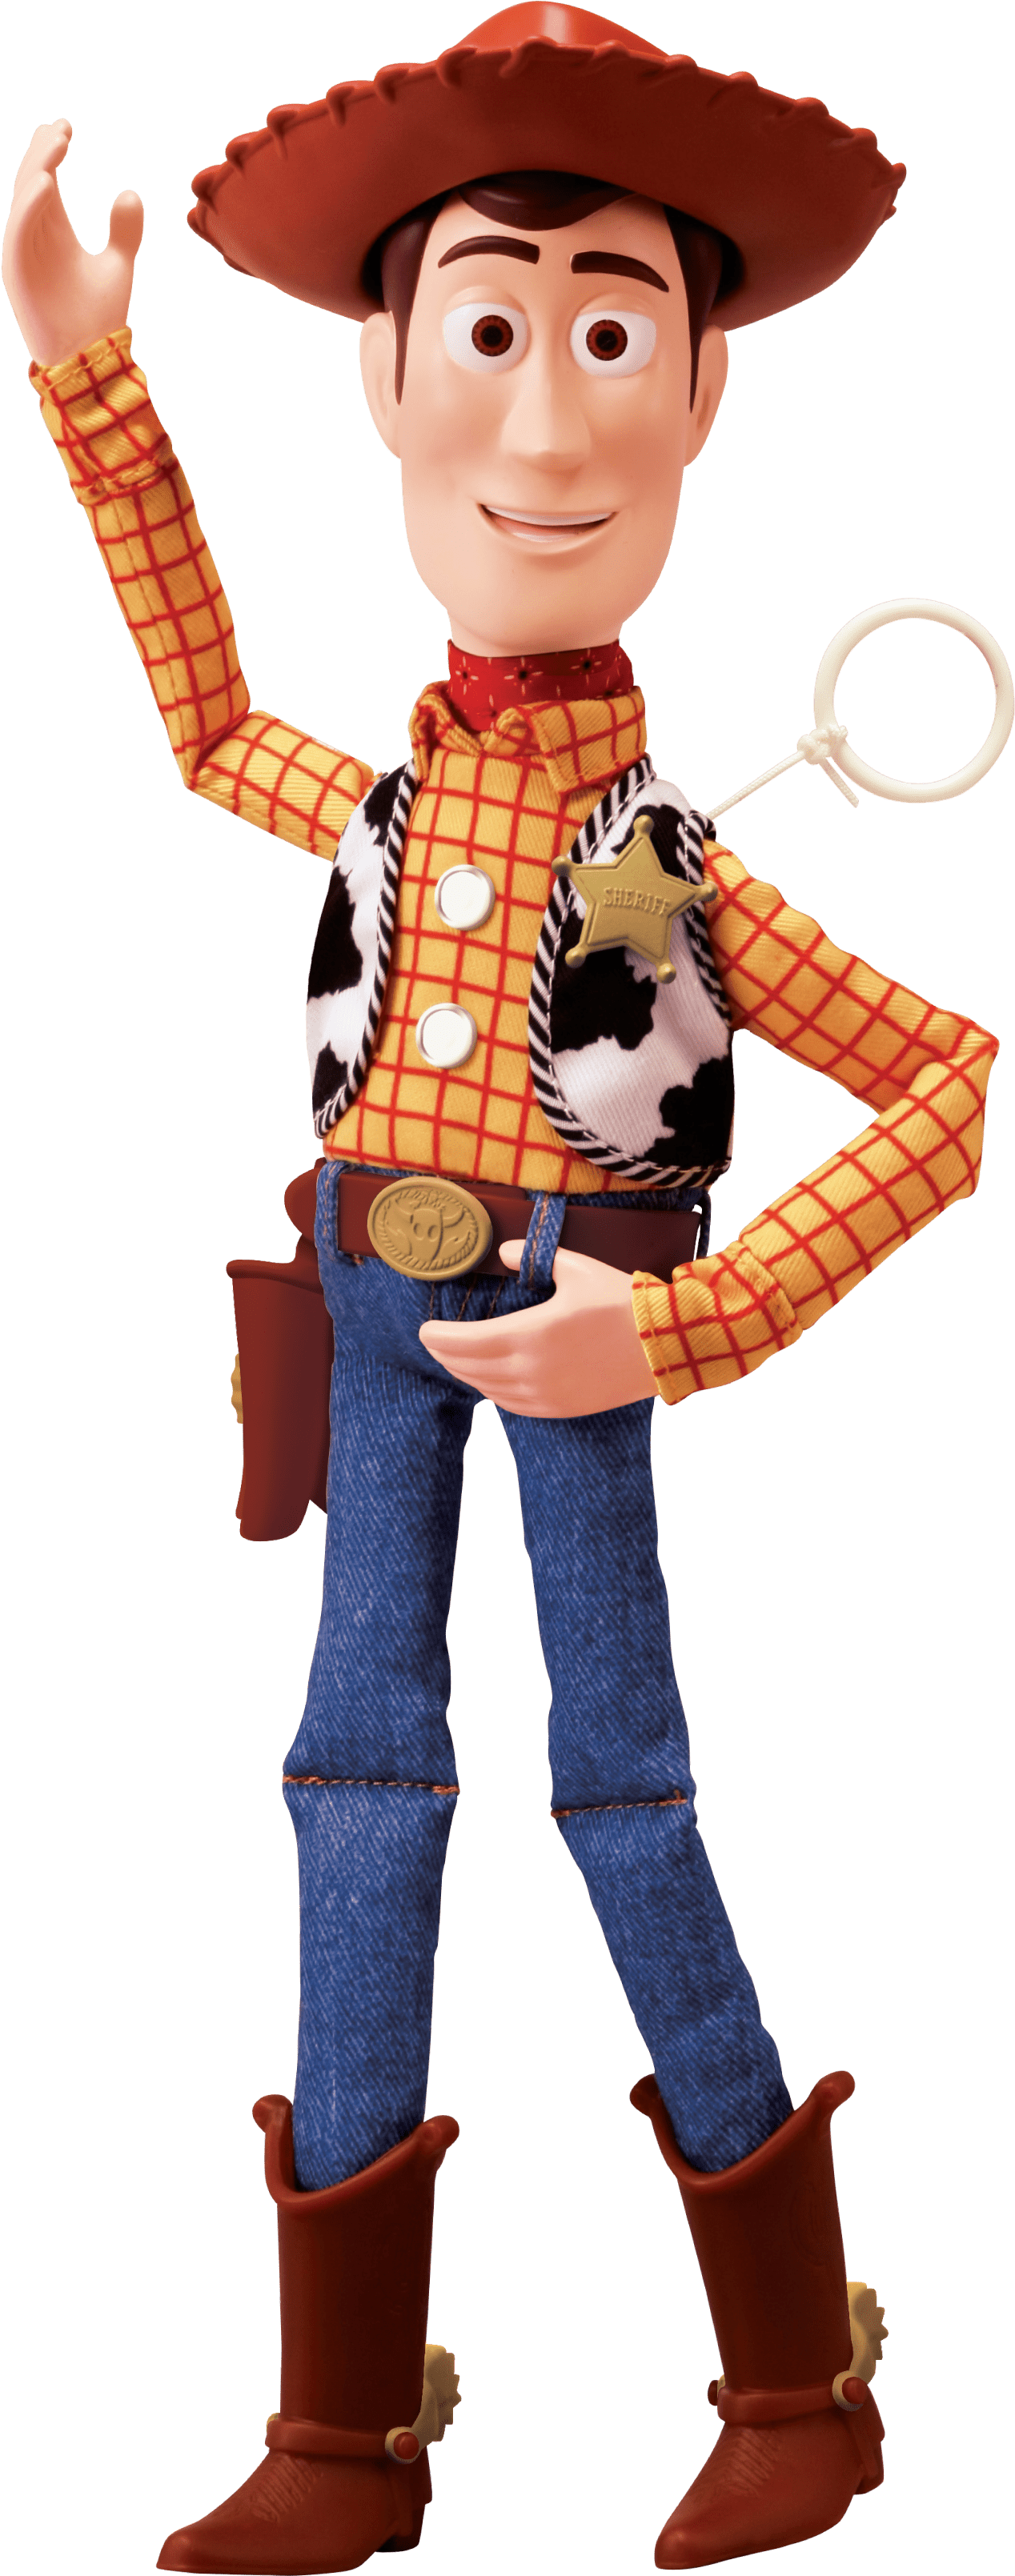 A Toy Cowboy With A Hat And A Gun PNG